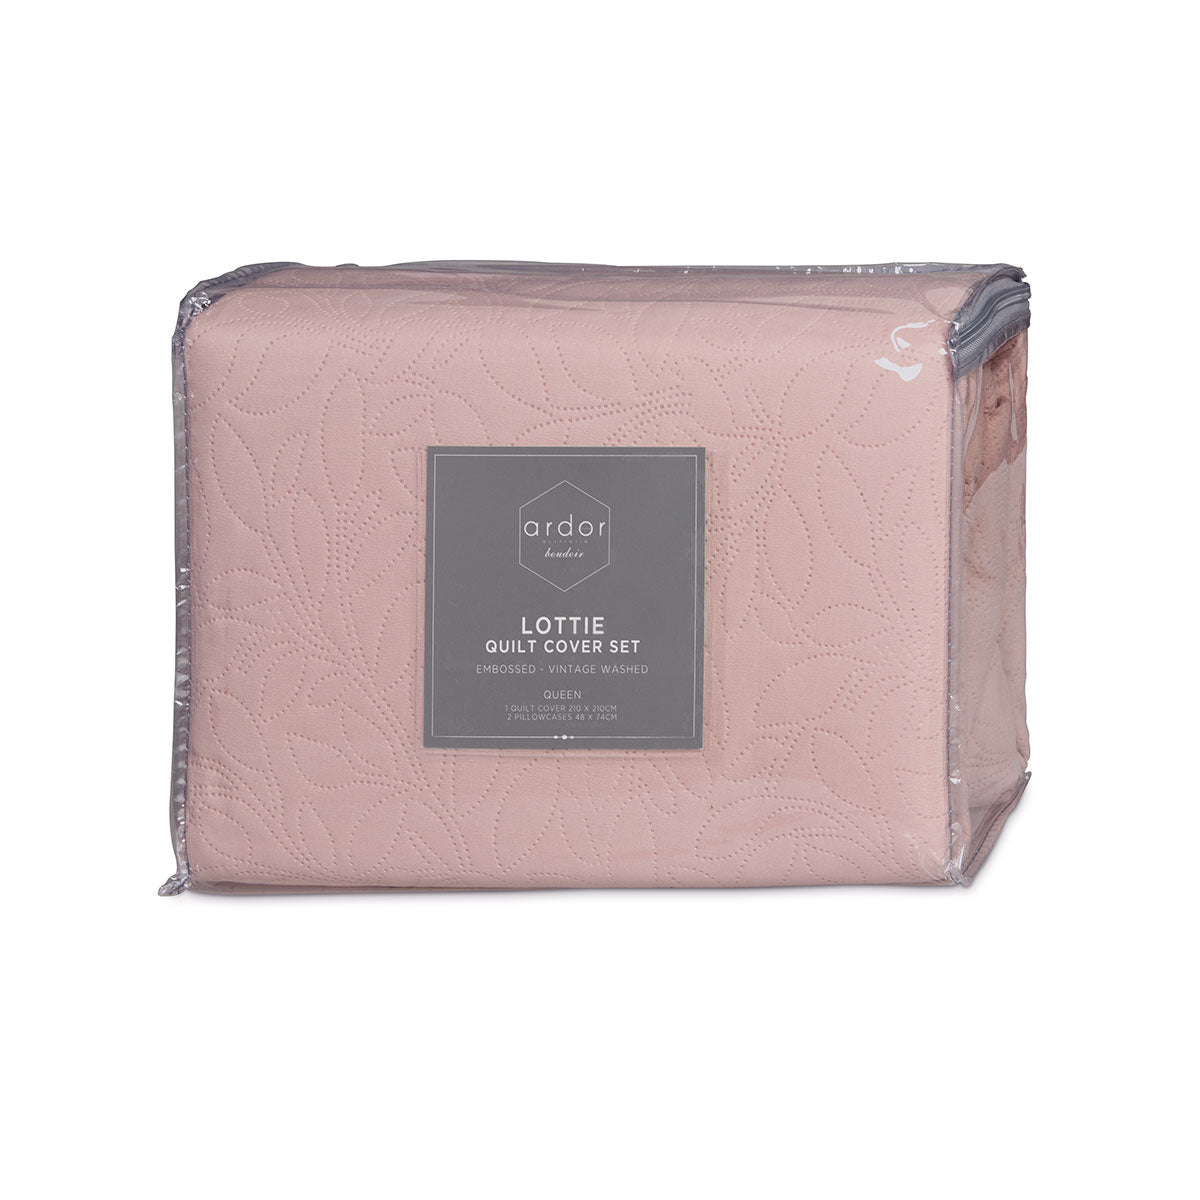 QUEEN Pinsonic Embossed Quilt Cover Set - Pink